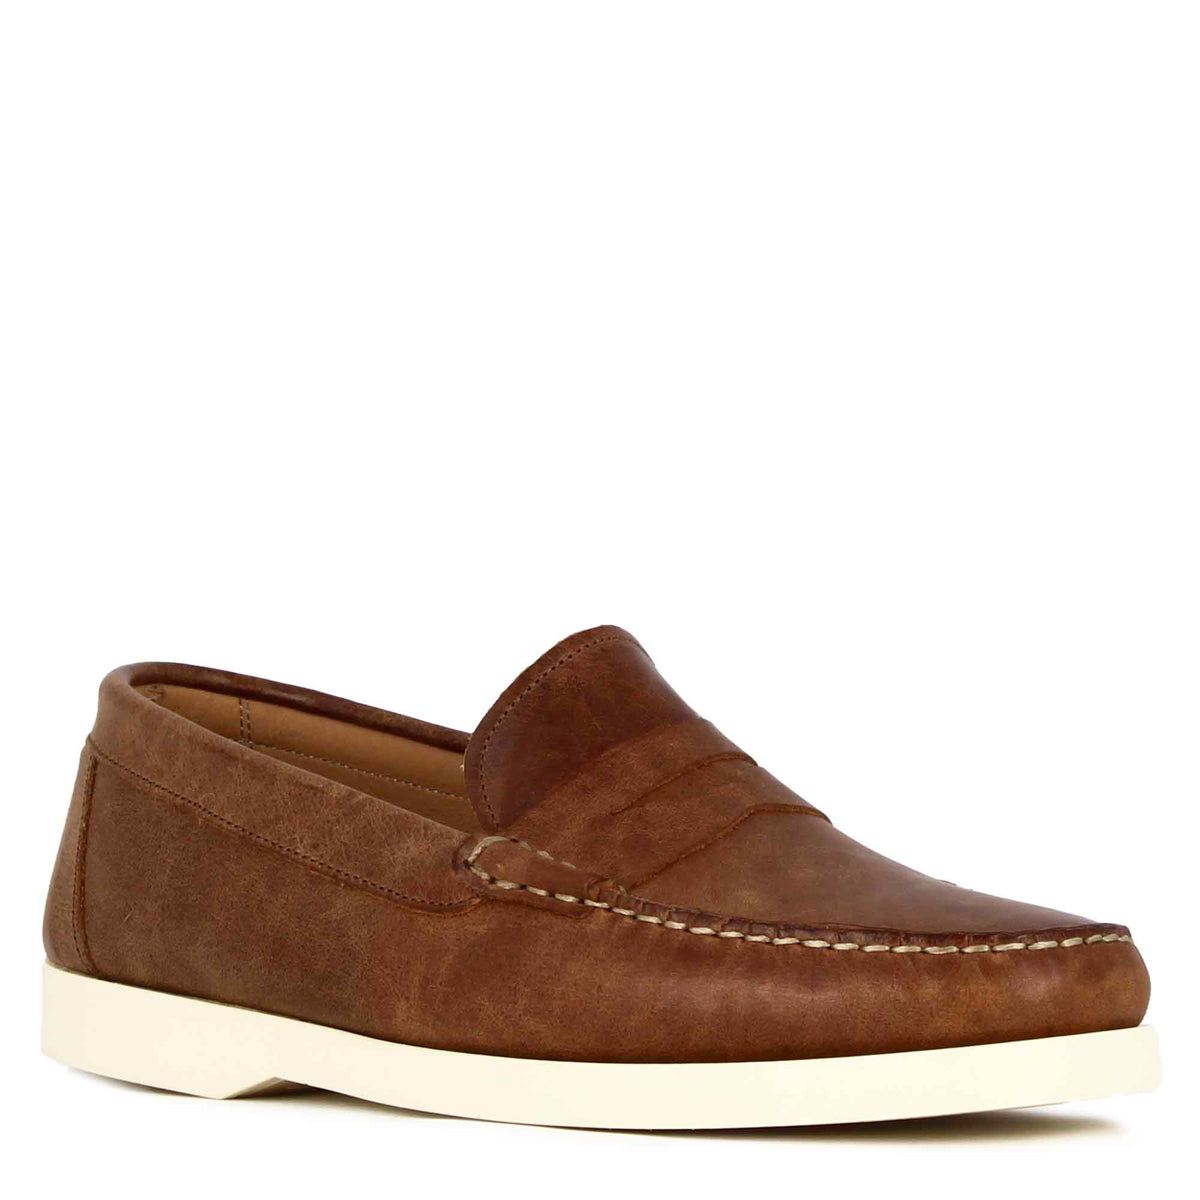 Casual men's boat moccasin in brown leather